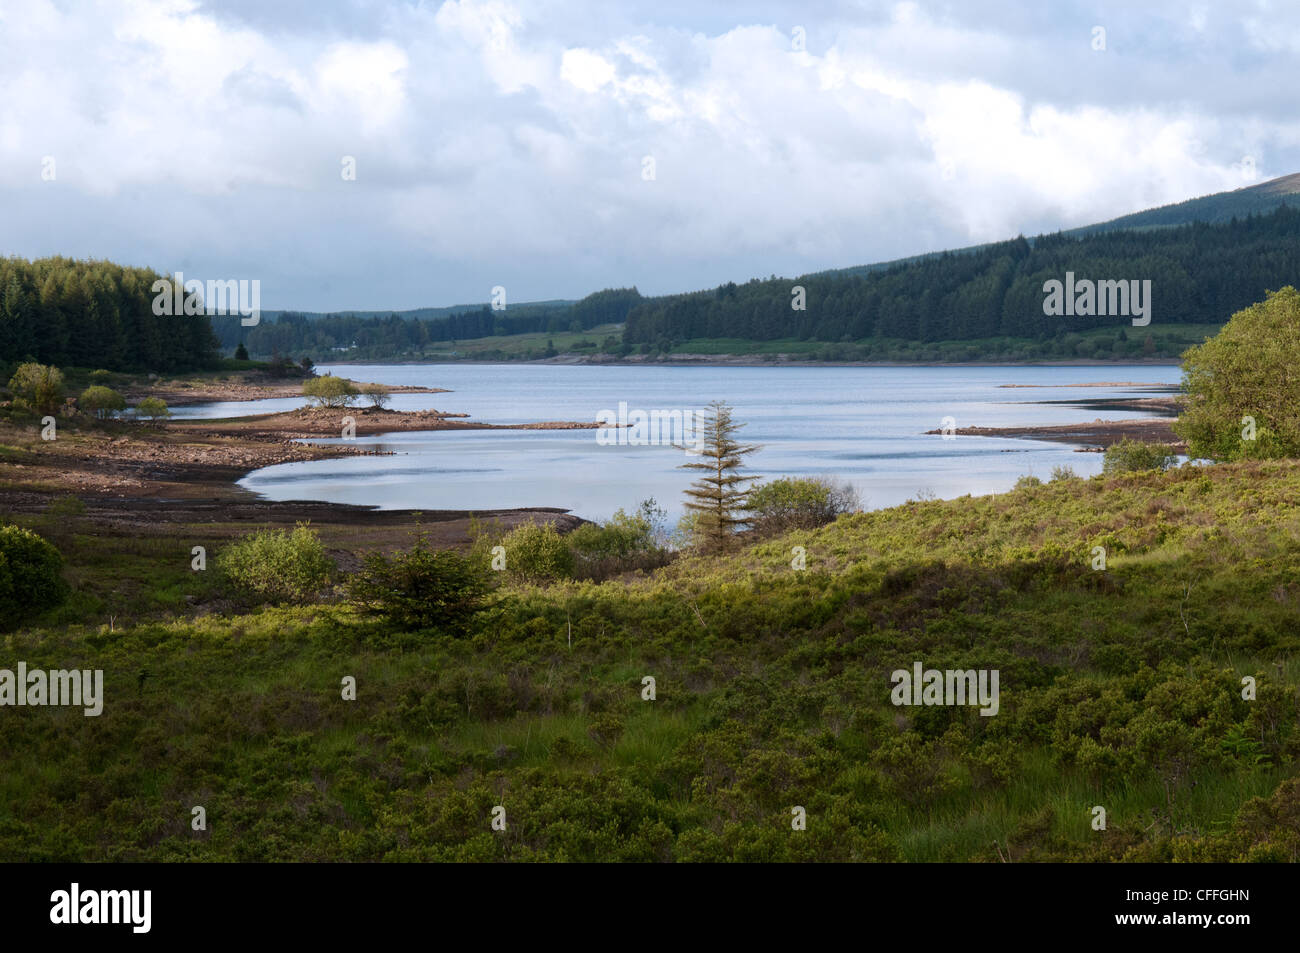 Dumfries and Galloway scotland clatteringshaws lago galloway Forest park Foto Stock